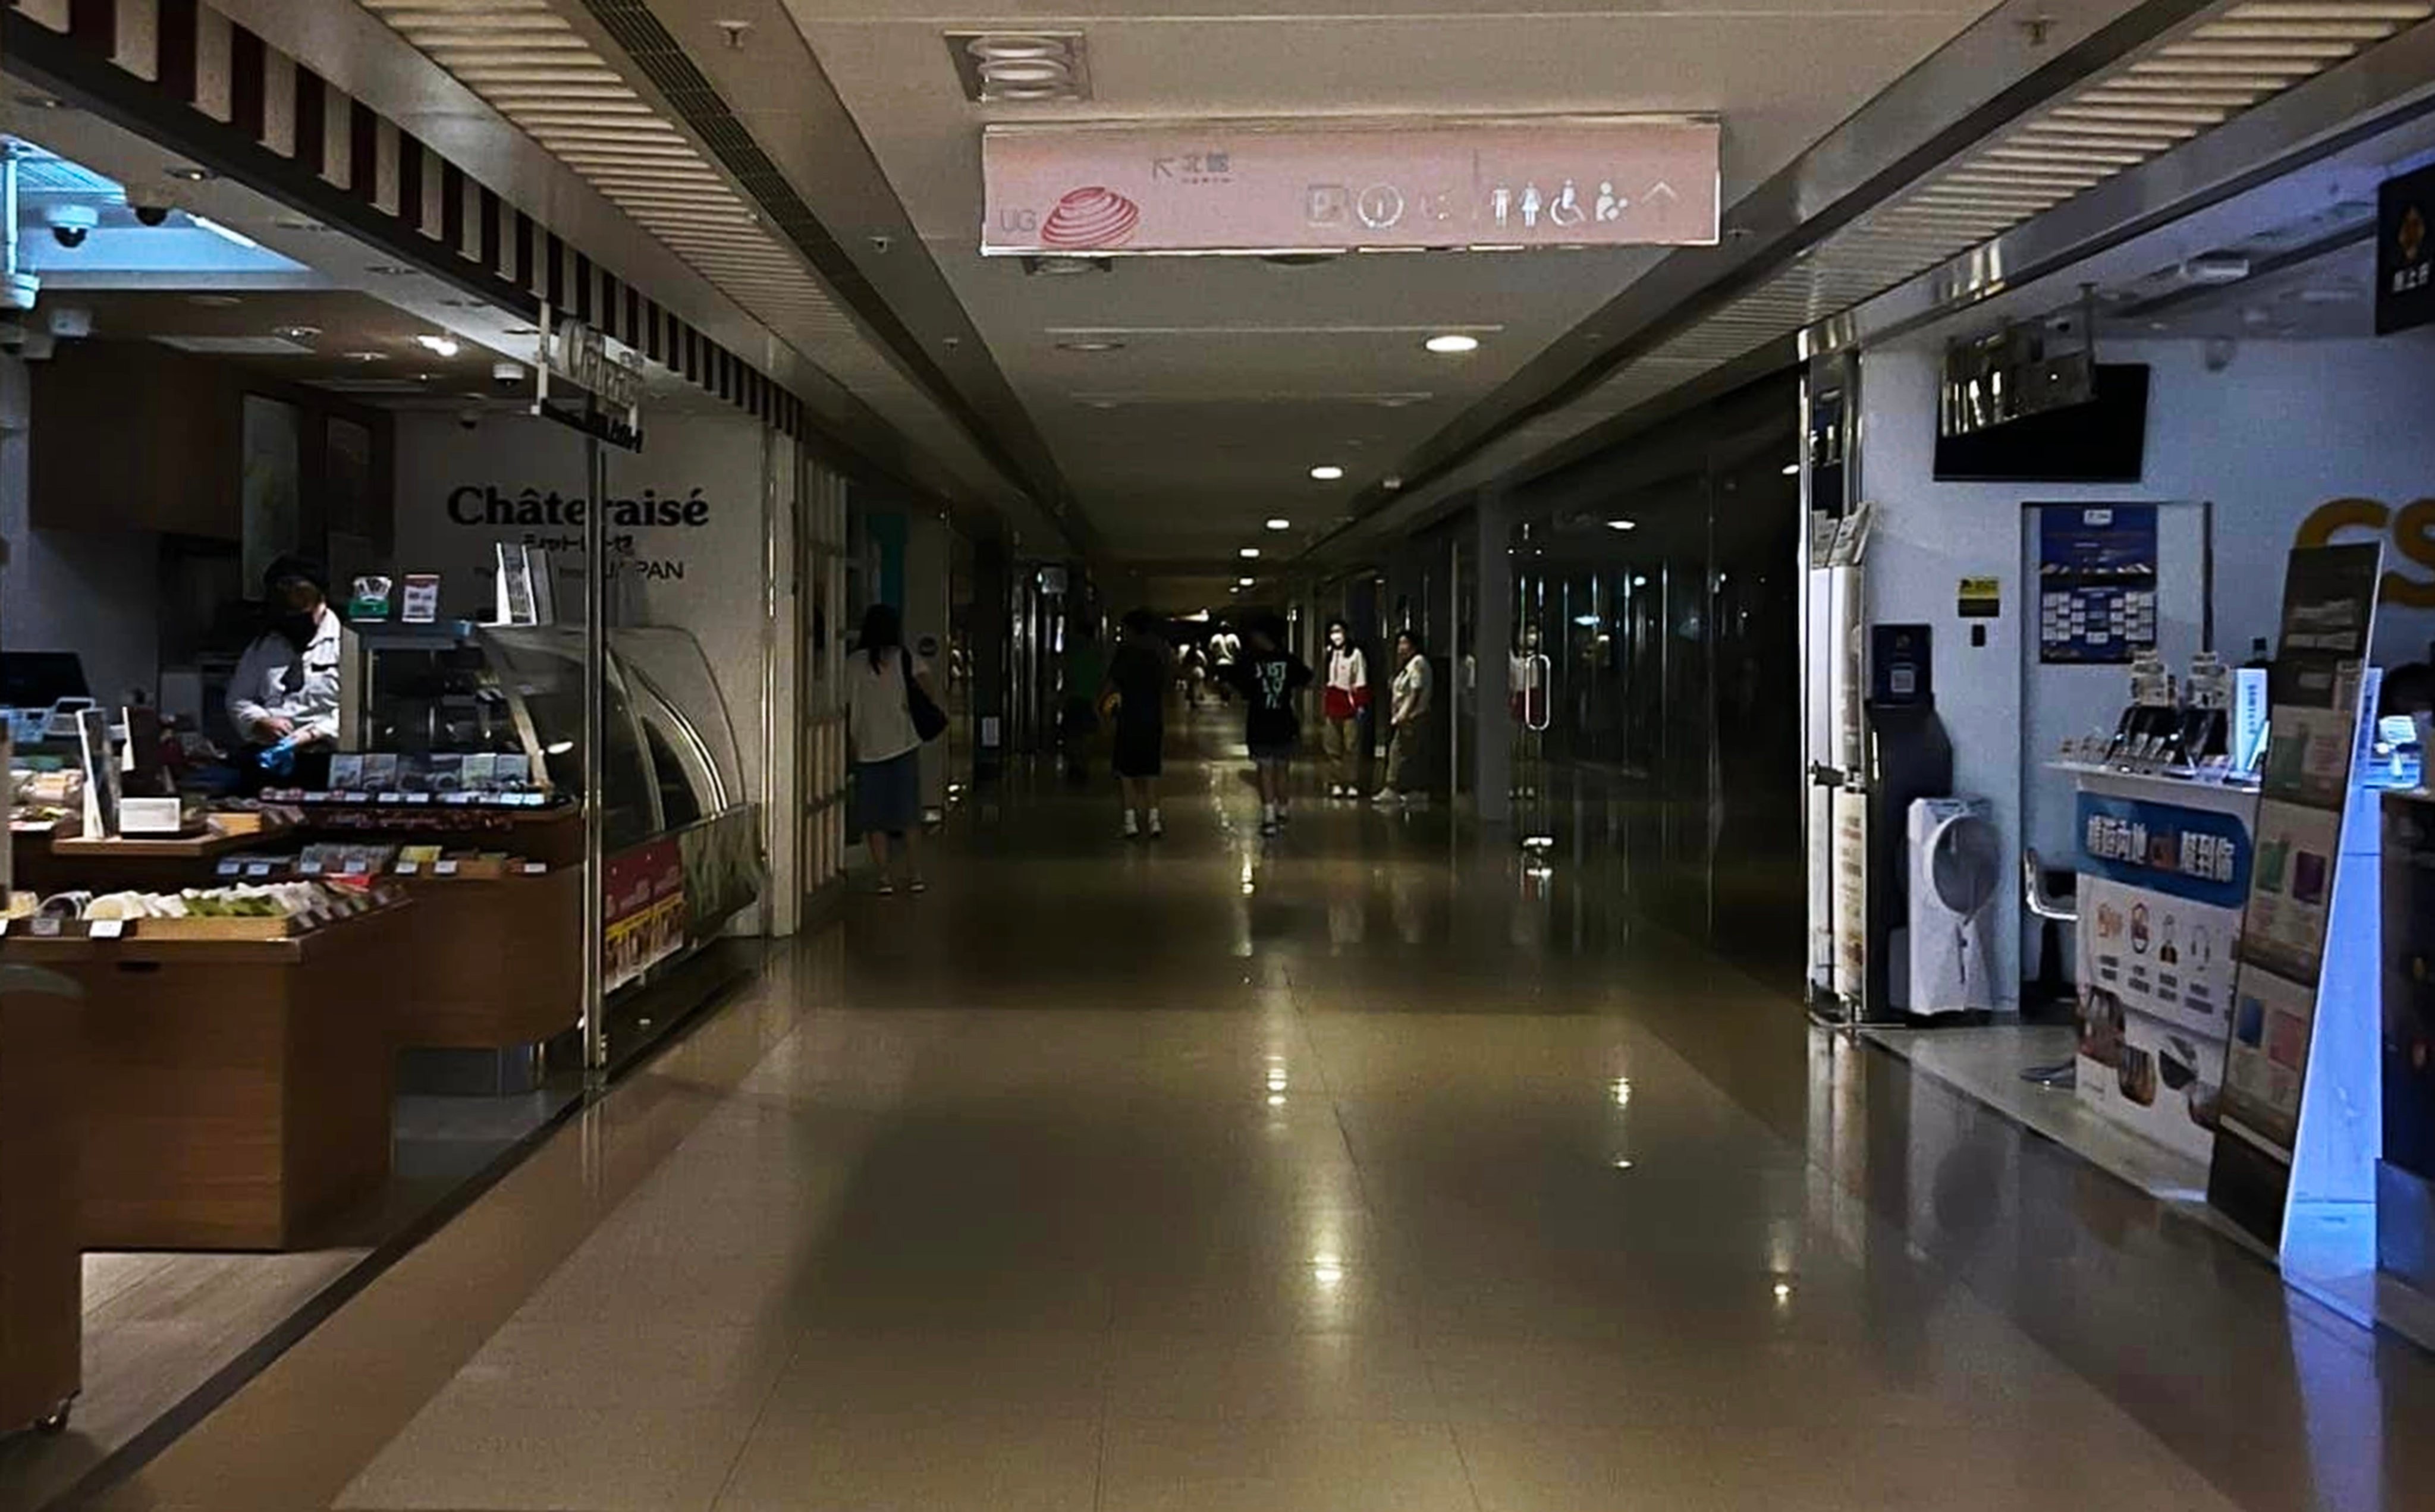 A power cut in Wong Tai Sin plunged some shopping centres into darkness. Photo: Handout